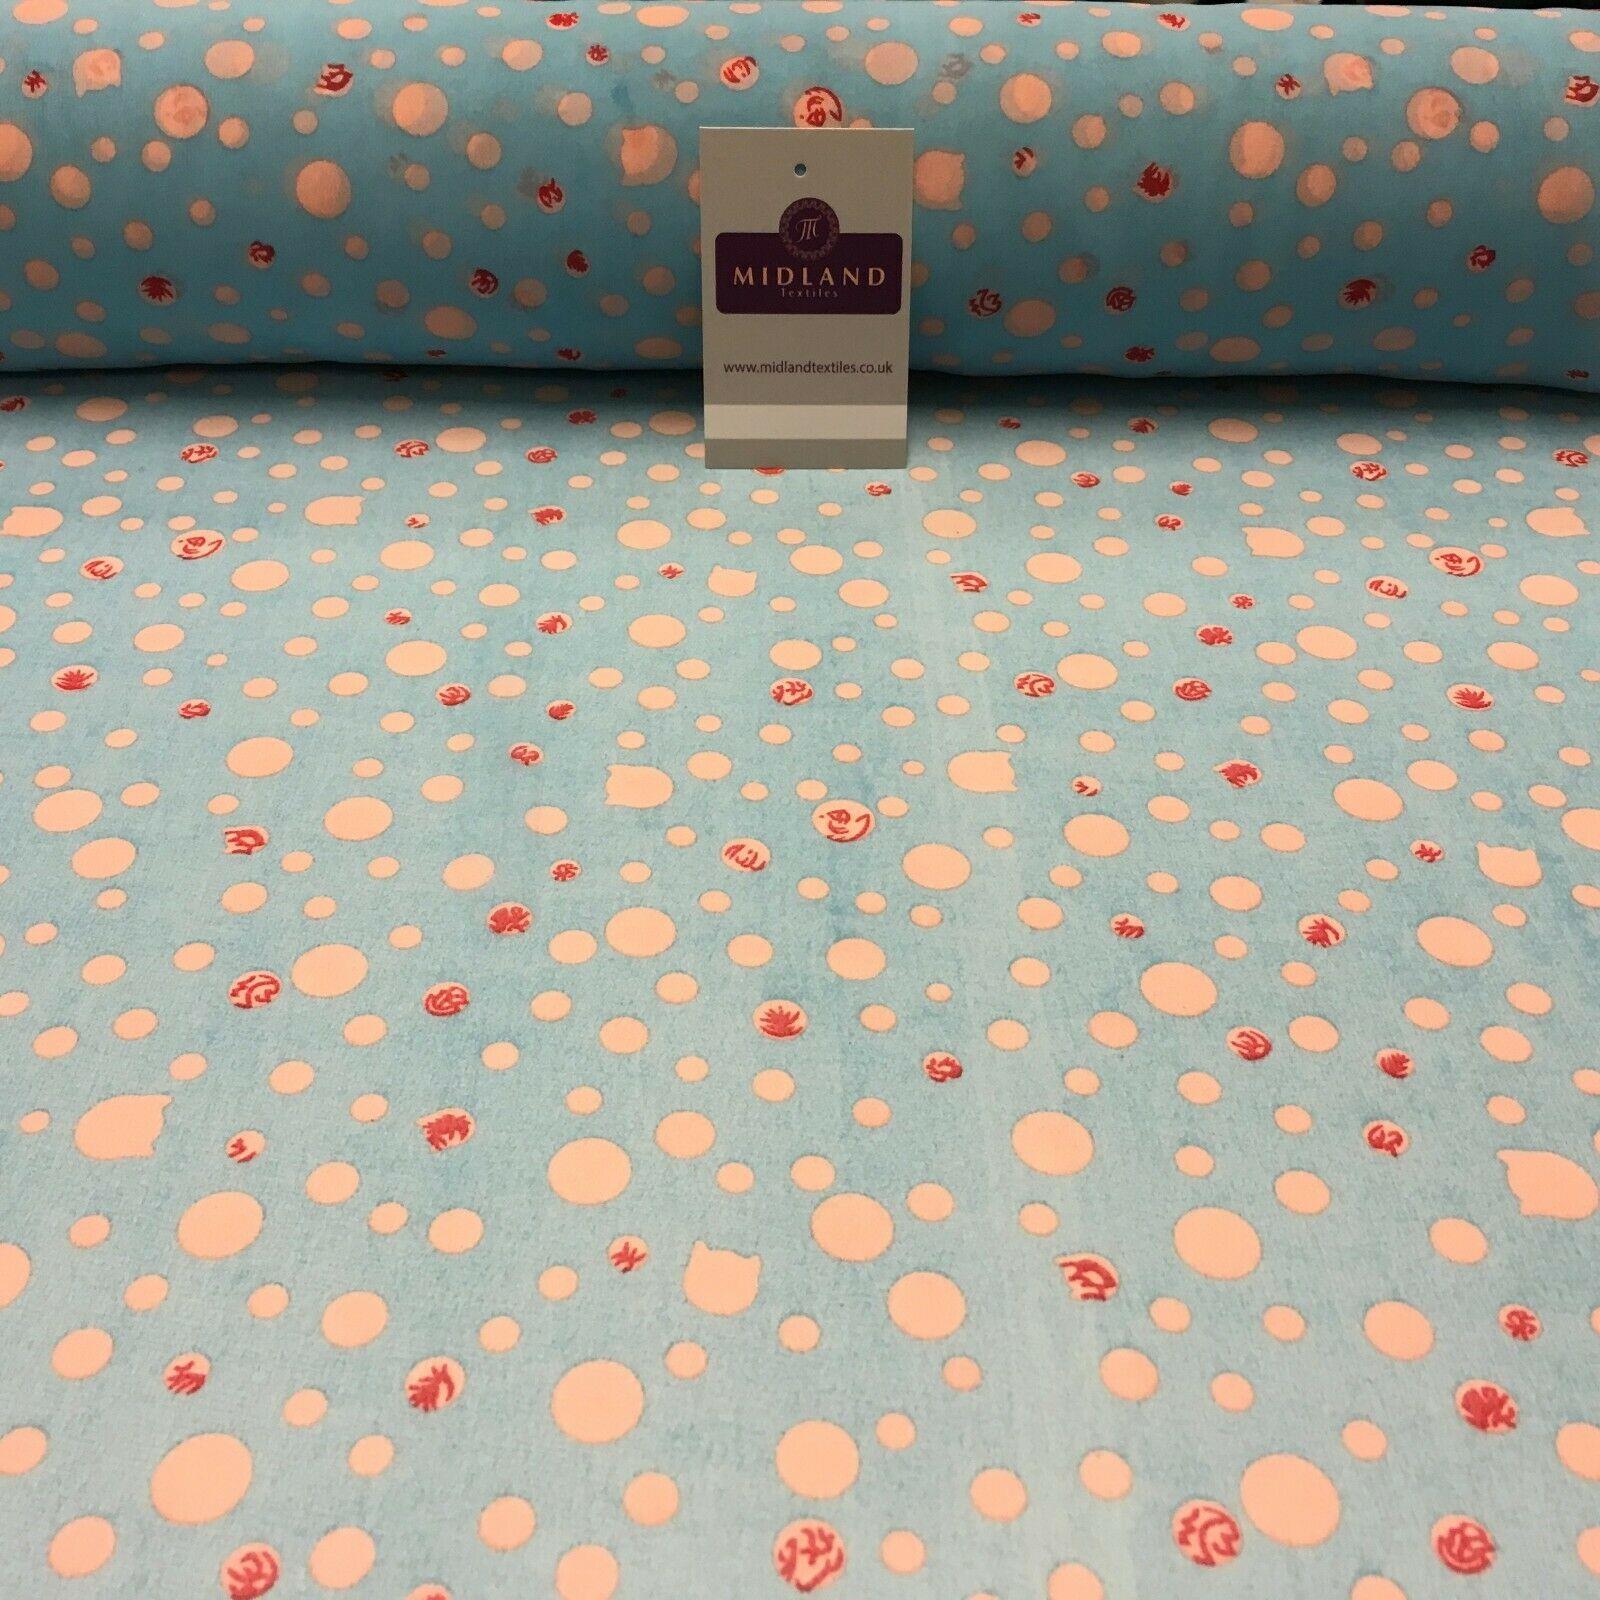 Turquoise Spotted Printed Crepe chiffon Dress Fabric 150 cm Wide MK1190-17 Mtex